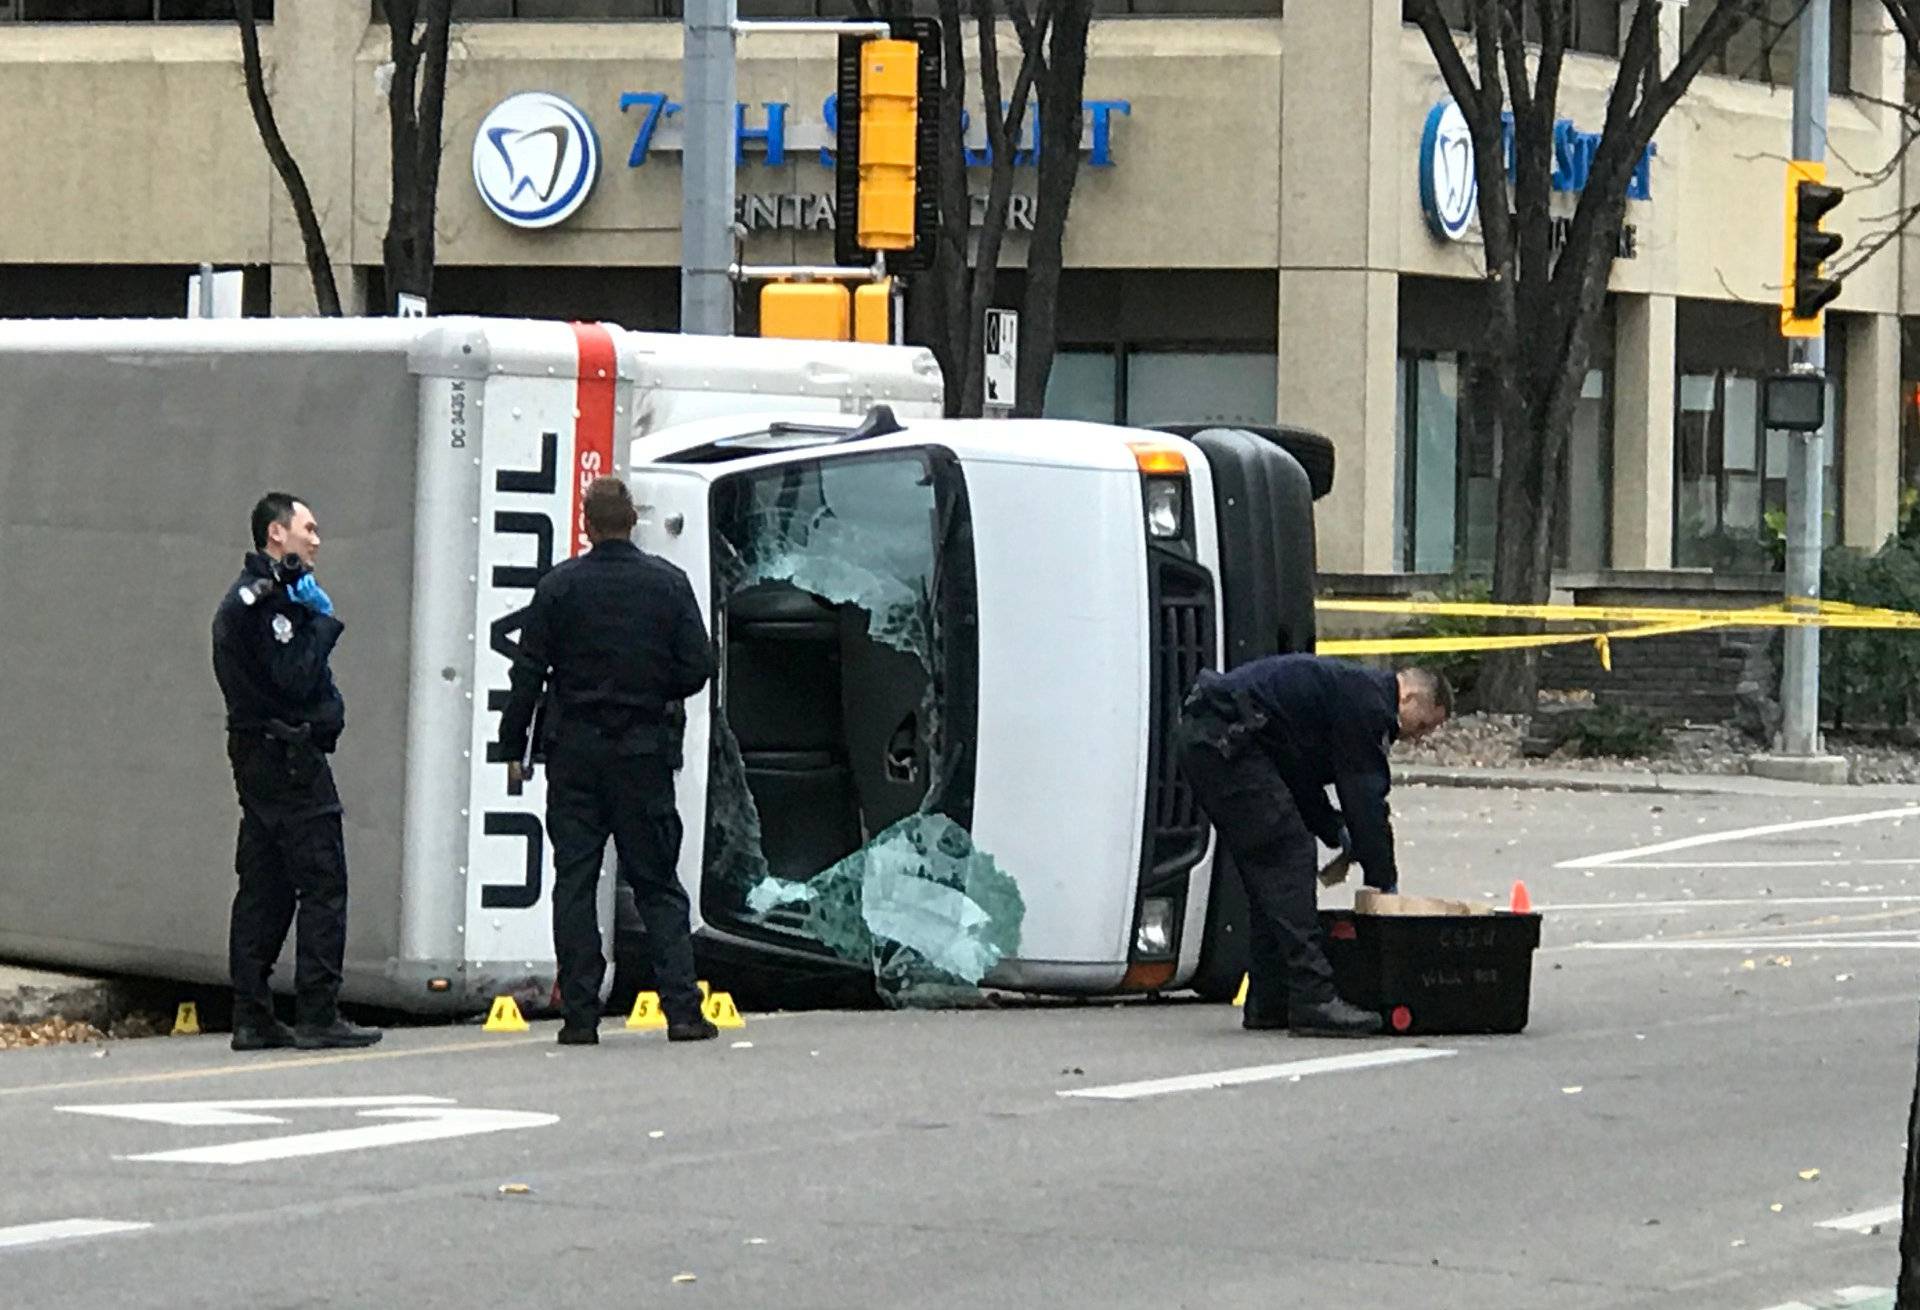 Edmonton Police investigate at the scene where a man hit pedestrians then flipped the U-Haul truck he was driving in Edmonton